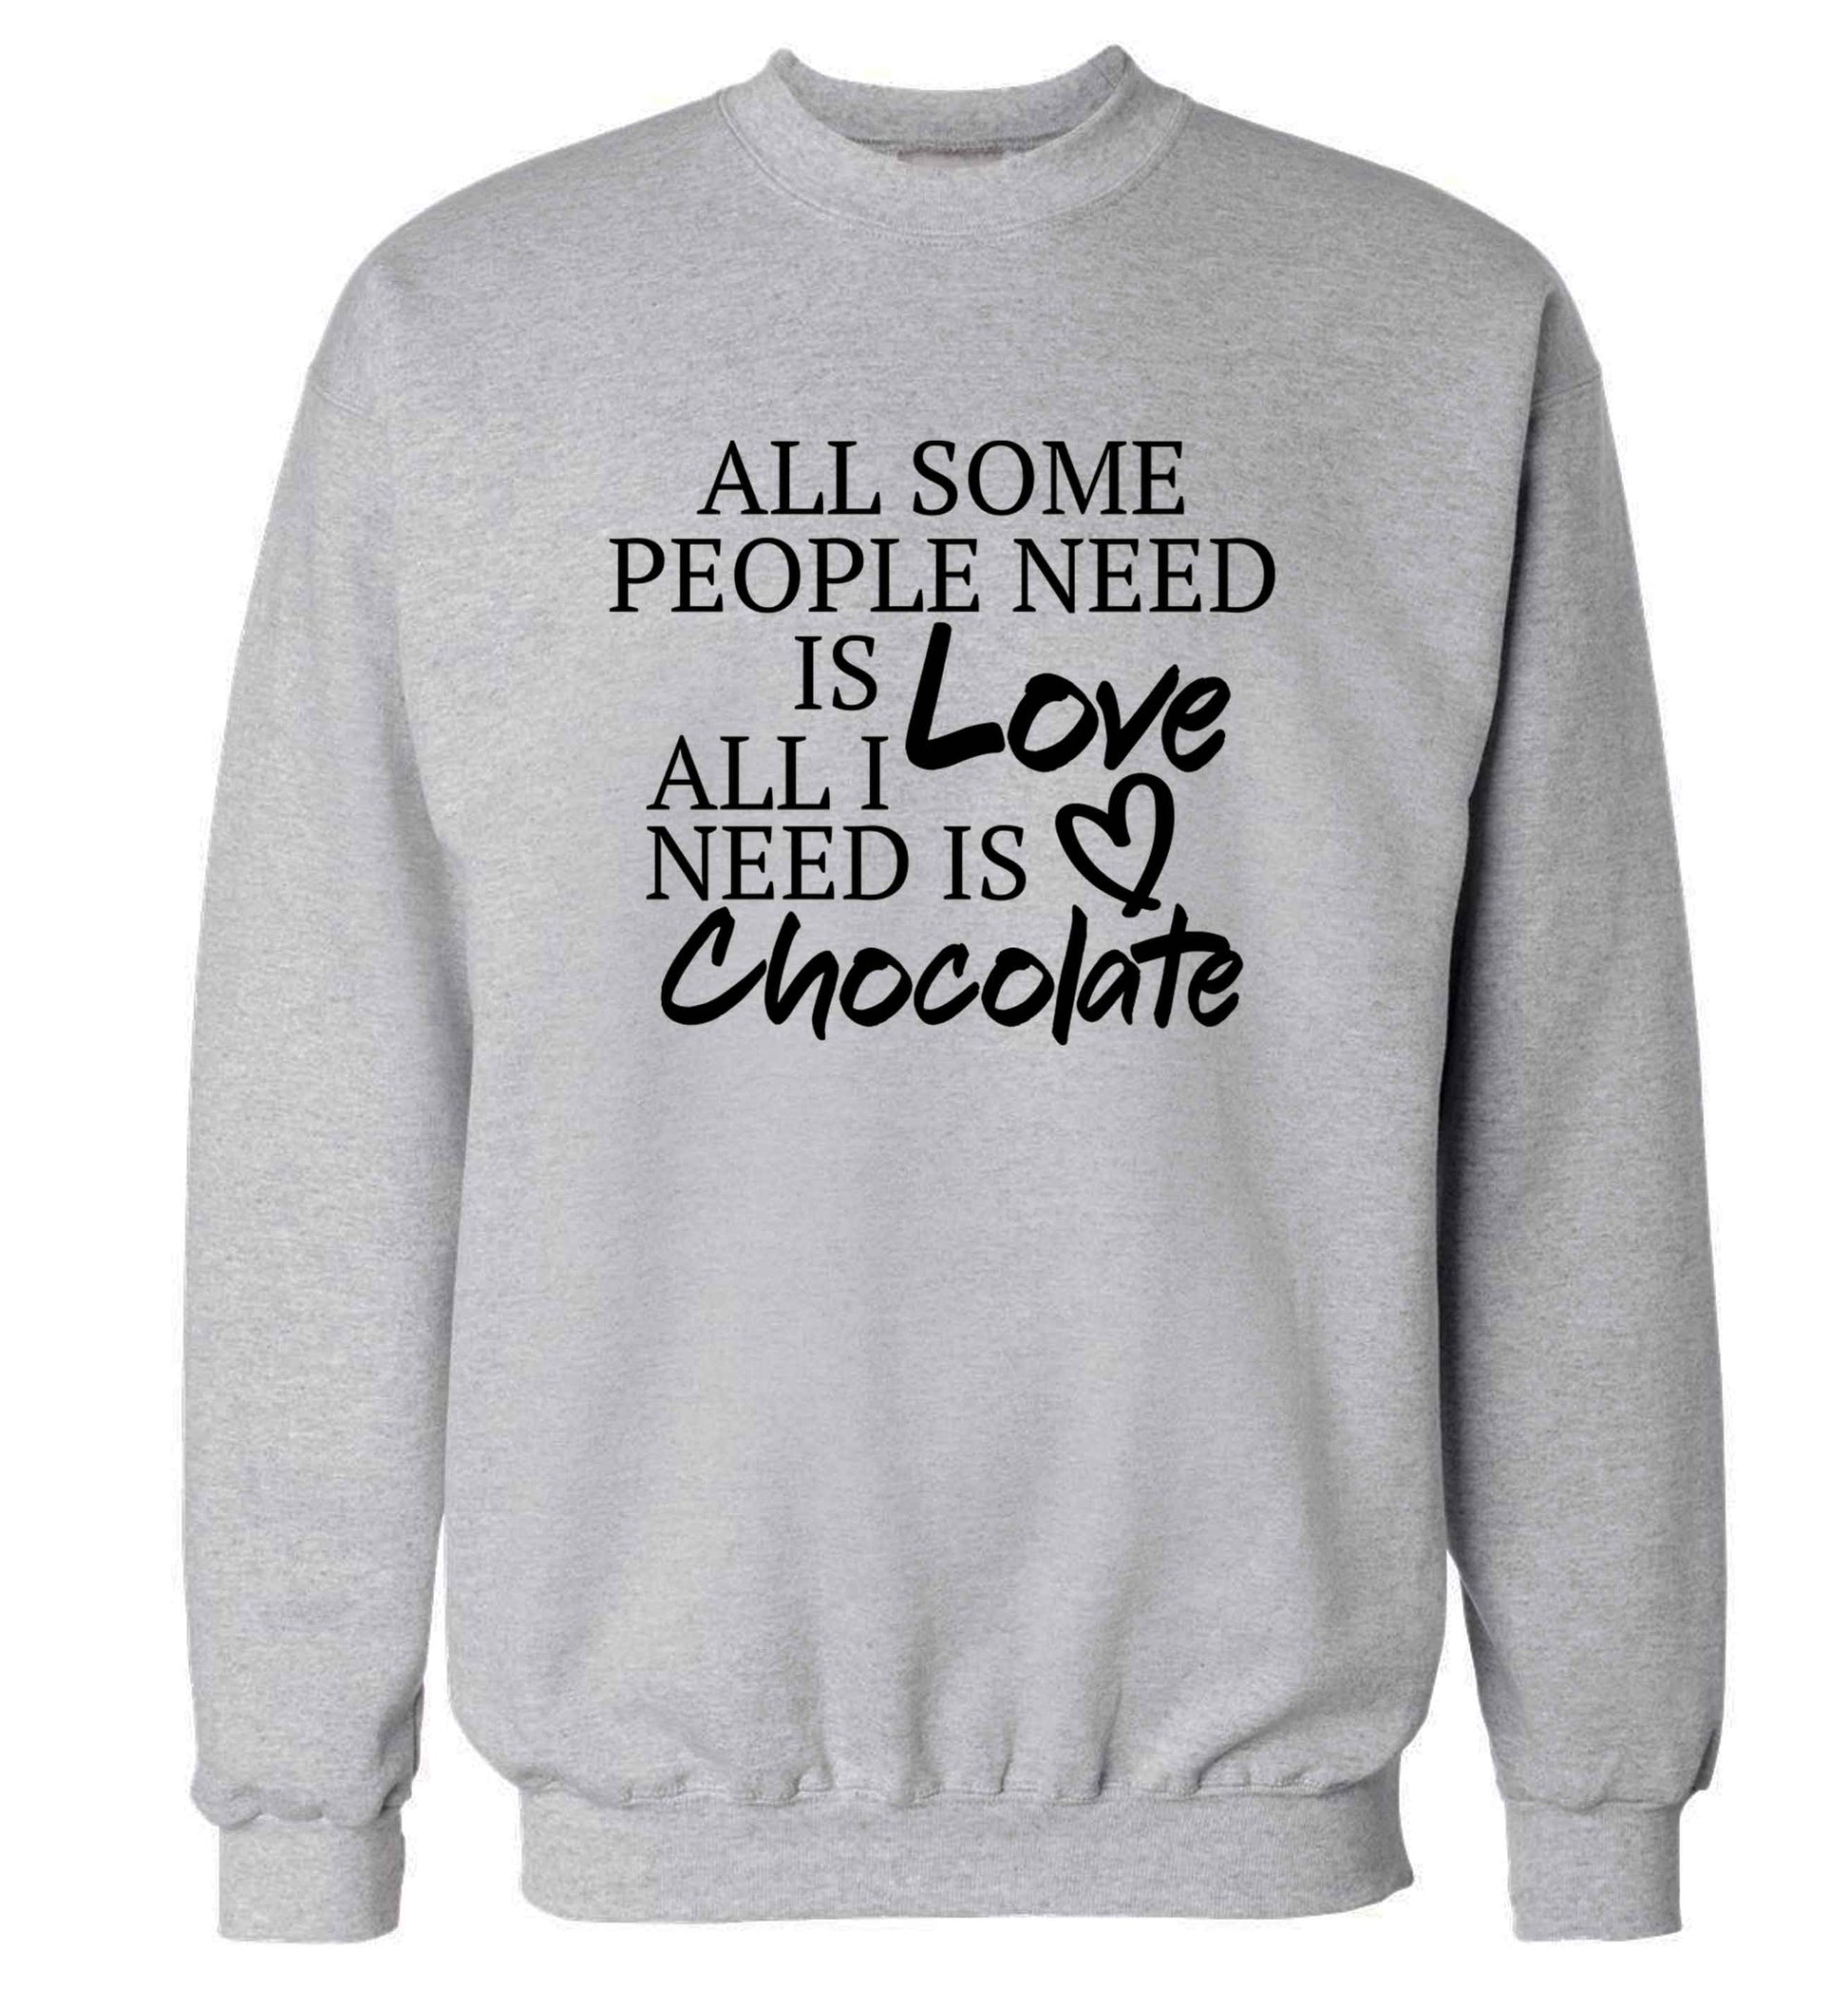 All some people need is love all I need is chocolate adult's unisex grey sweater 2XL